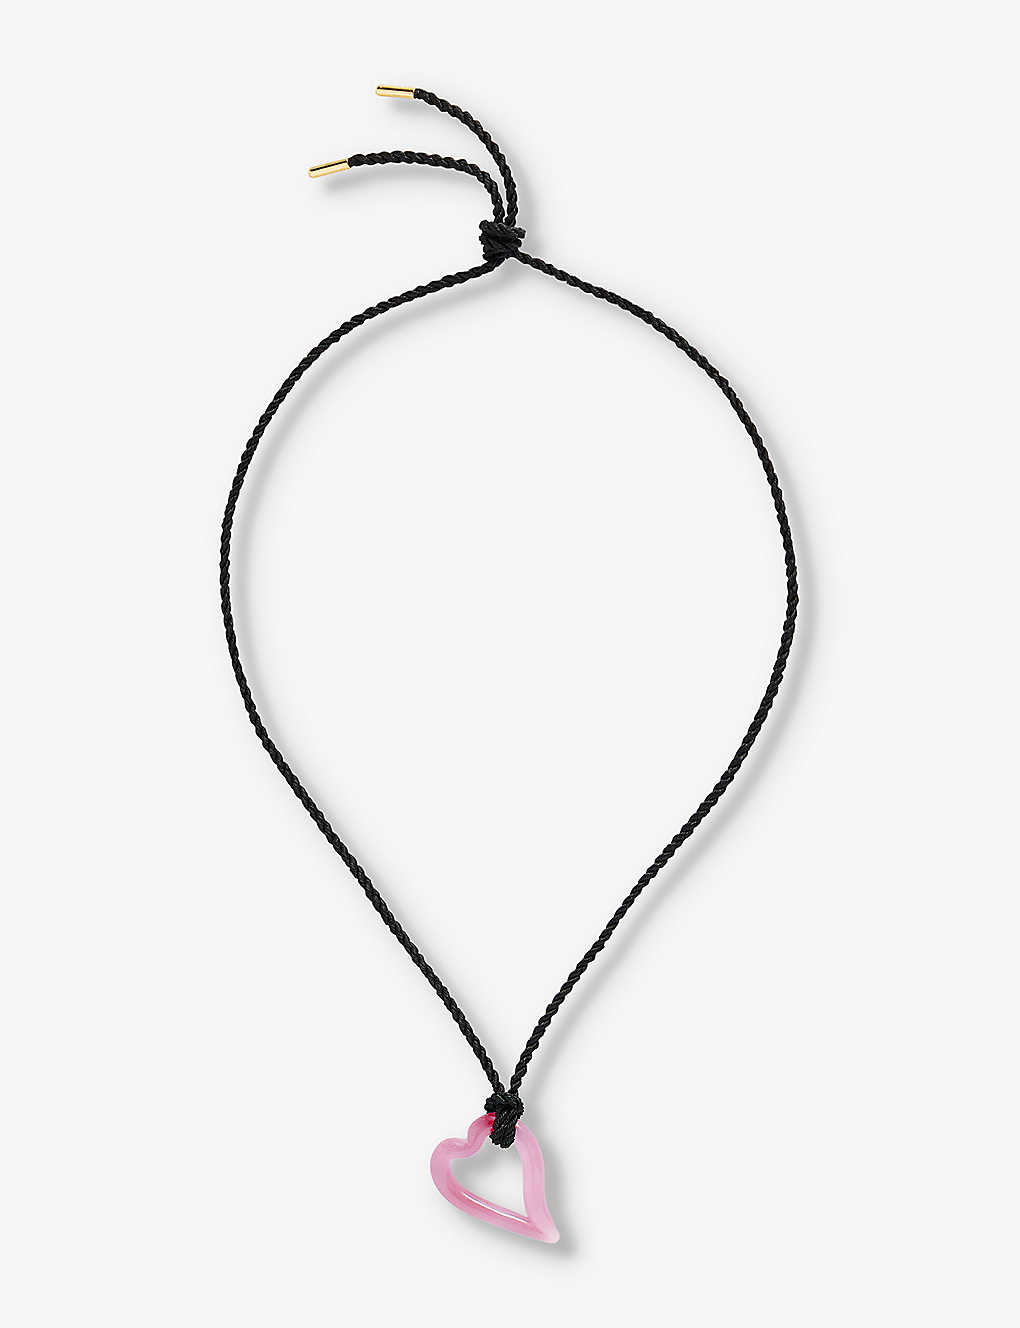 Sandralexandra Heart Of Glass Silk Cord And Glass Pendant Necklace In Cloudy Pink/black Cord